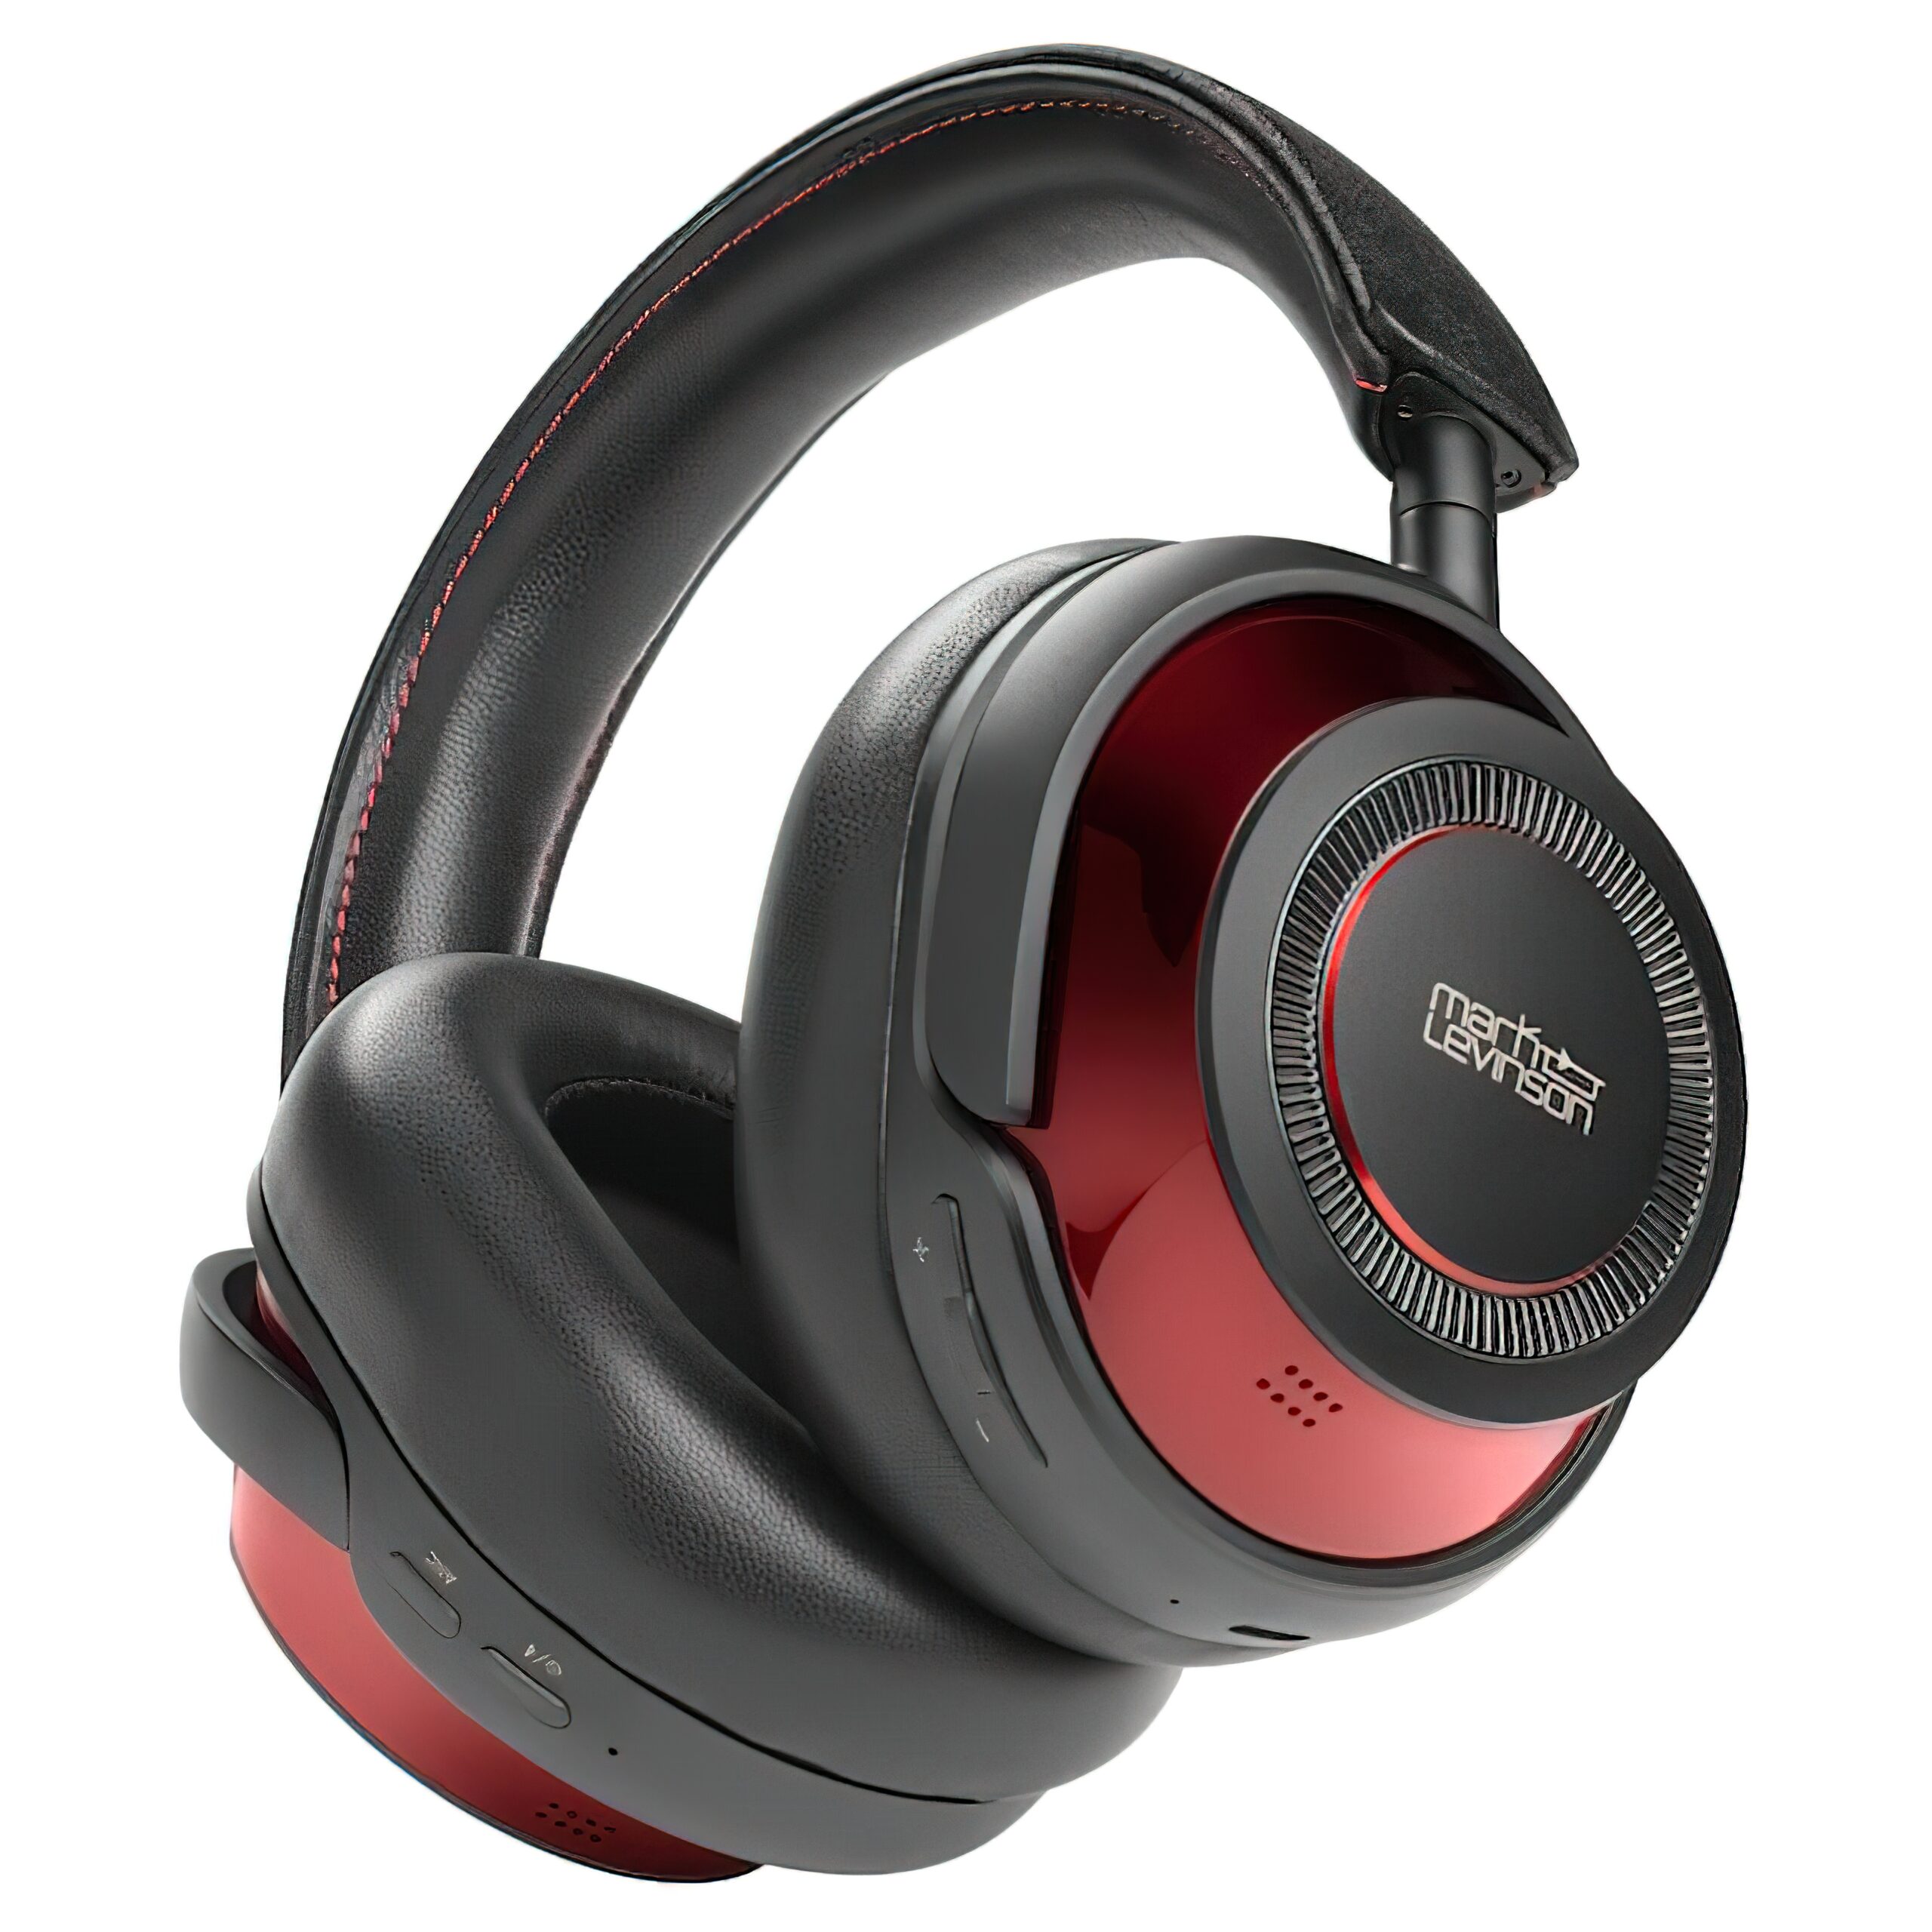 mark levinson 5909 wireless headphones red LB scaled 1 scaled 1